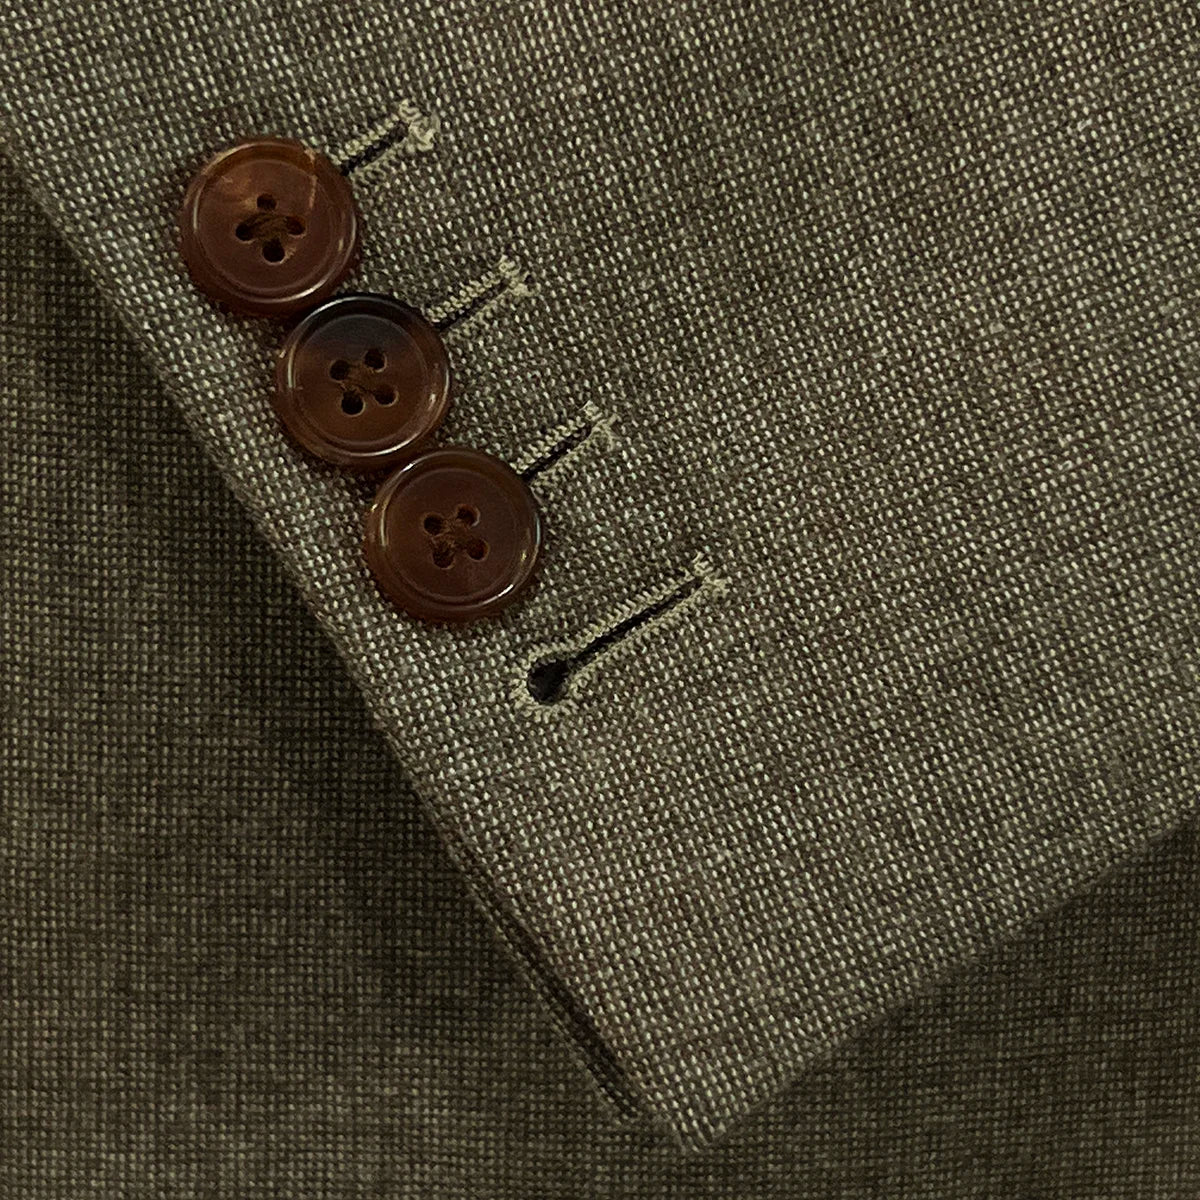 View of the functional sleeve buttonholes on the Westwood Hart brown nailhead men's suit jacket, showcasing the precise craftsmanship.